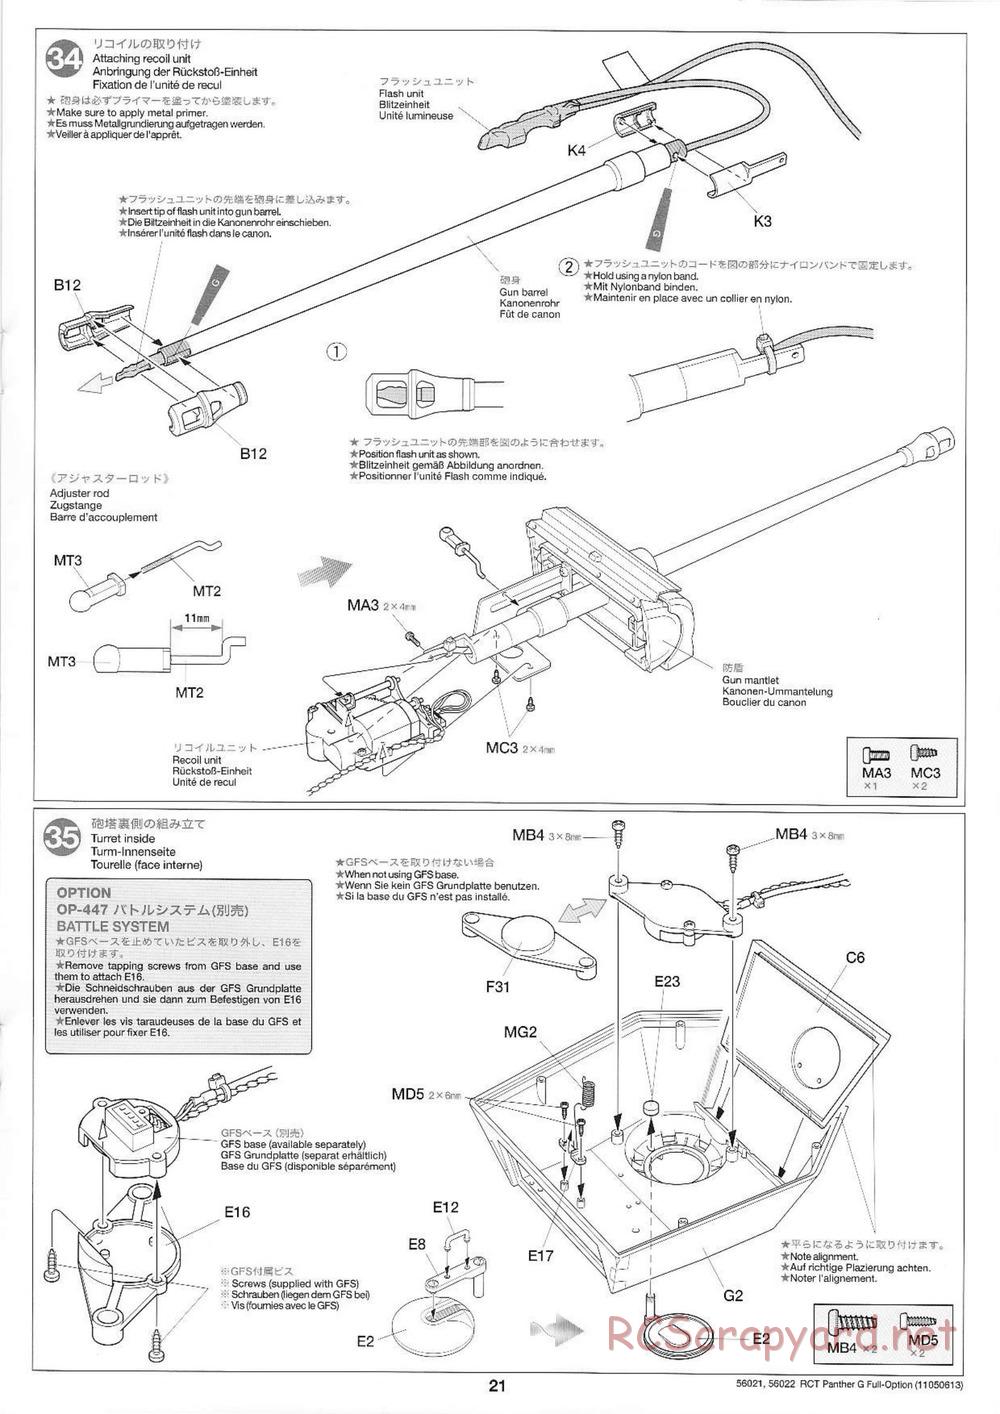 Tamiya - Panther Type G - 1/16 Scale Chassis - Manual - Page 21